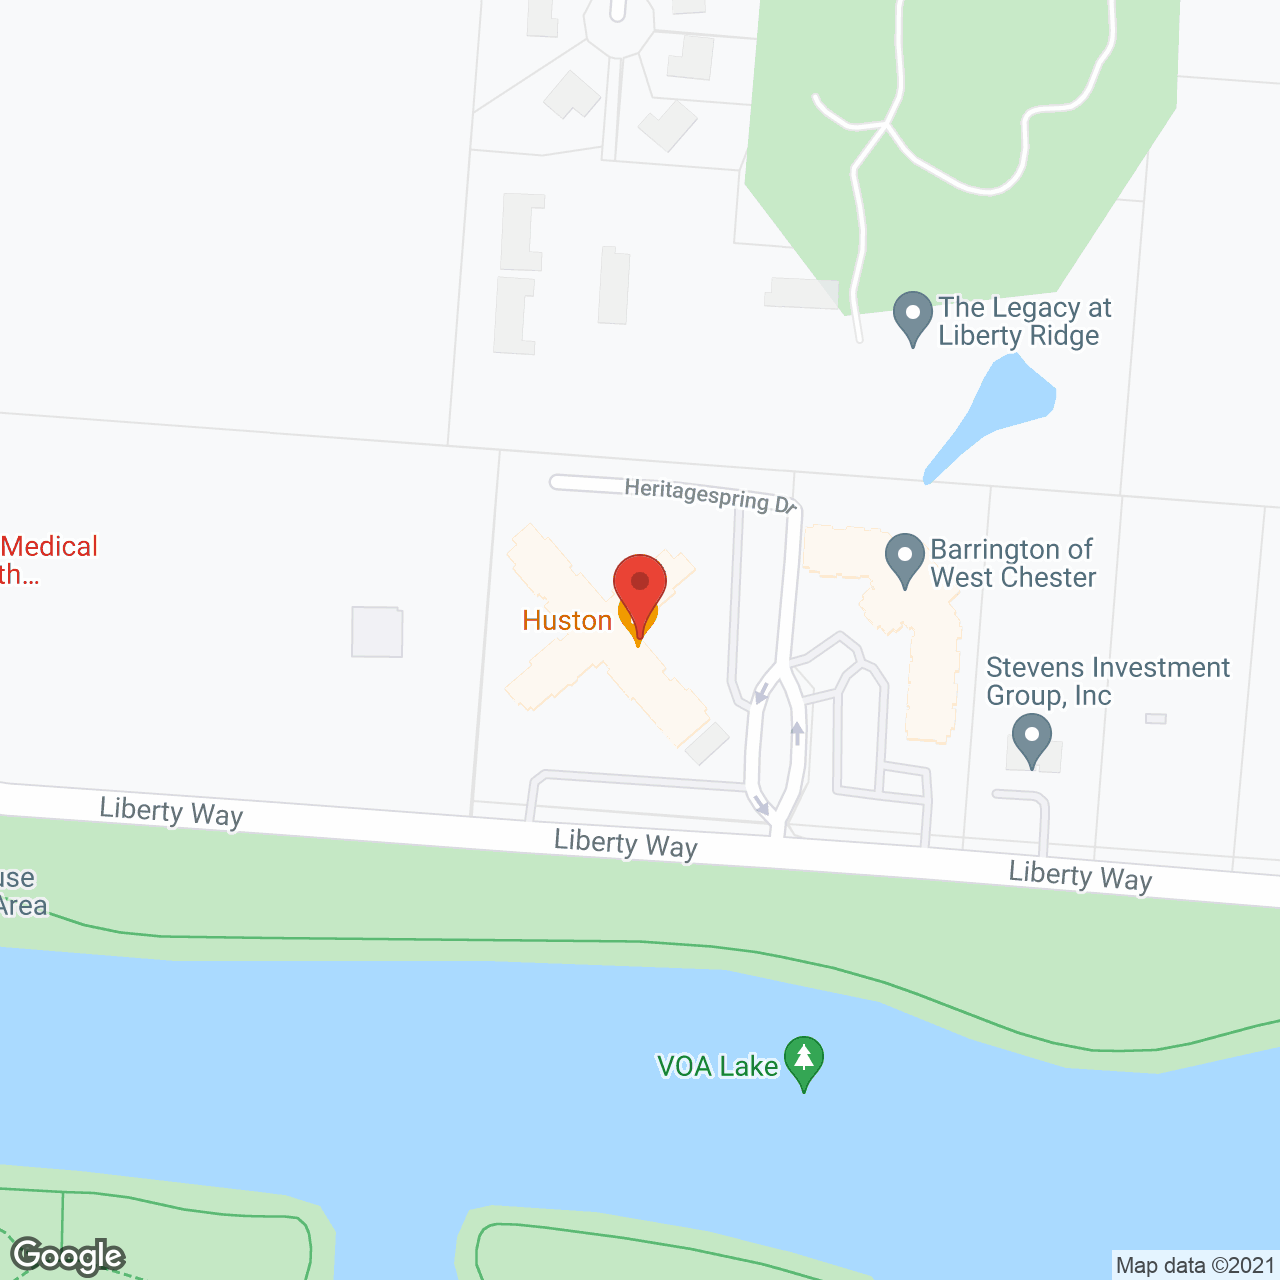 Barrington of West Chester in google map